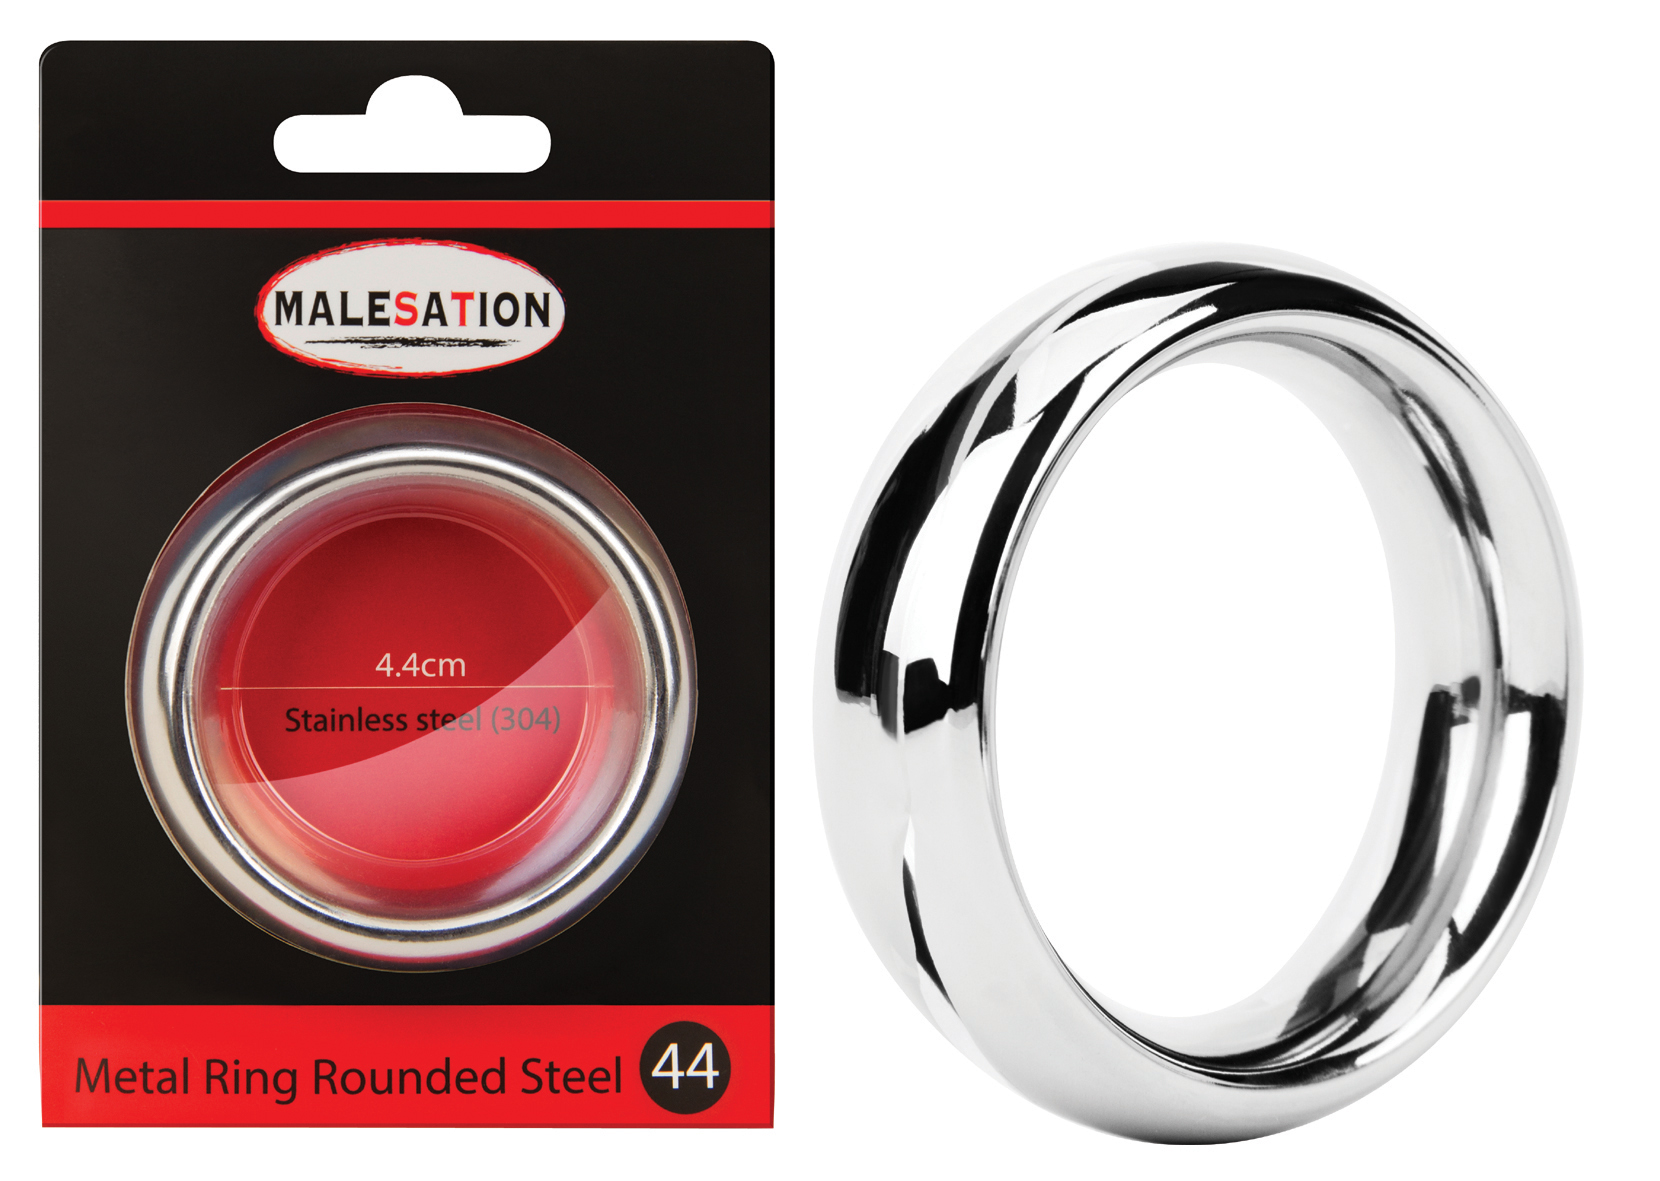 MALESATION Metal Ring Rounded Steel 44